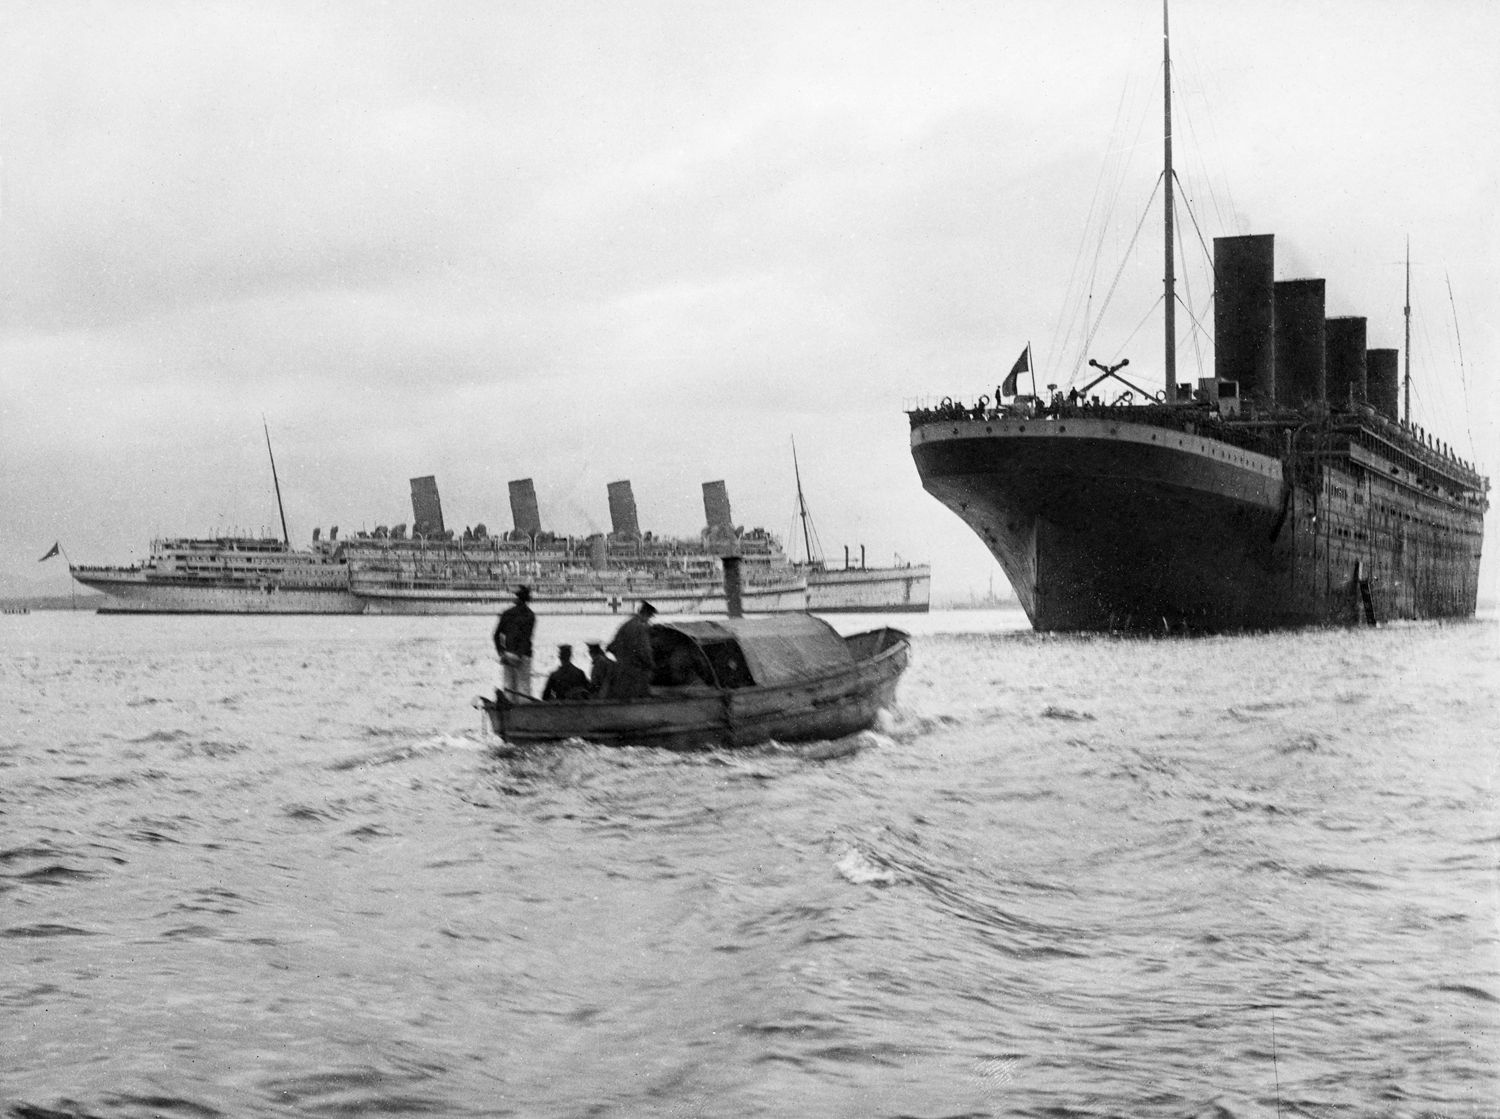 Hospital ship Aquitania, left, and transport Olympic lie at anchor in the Dardanelles in 1915. Aquitania is taking on wounded soldiers for transport to England.